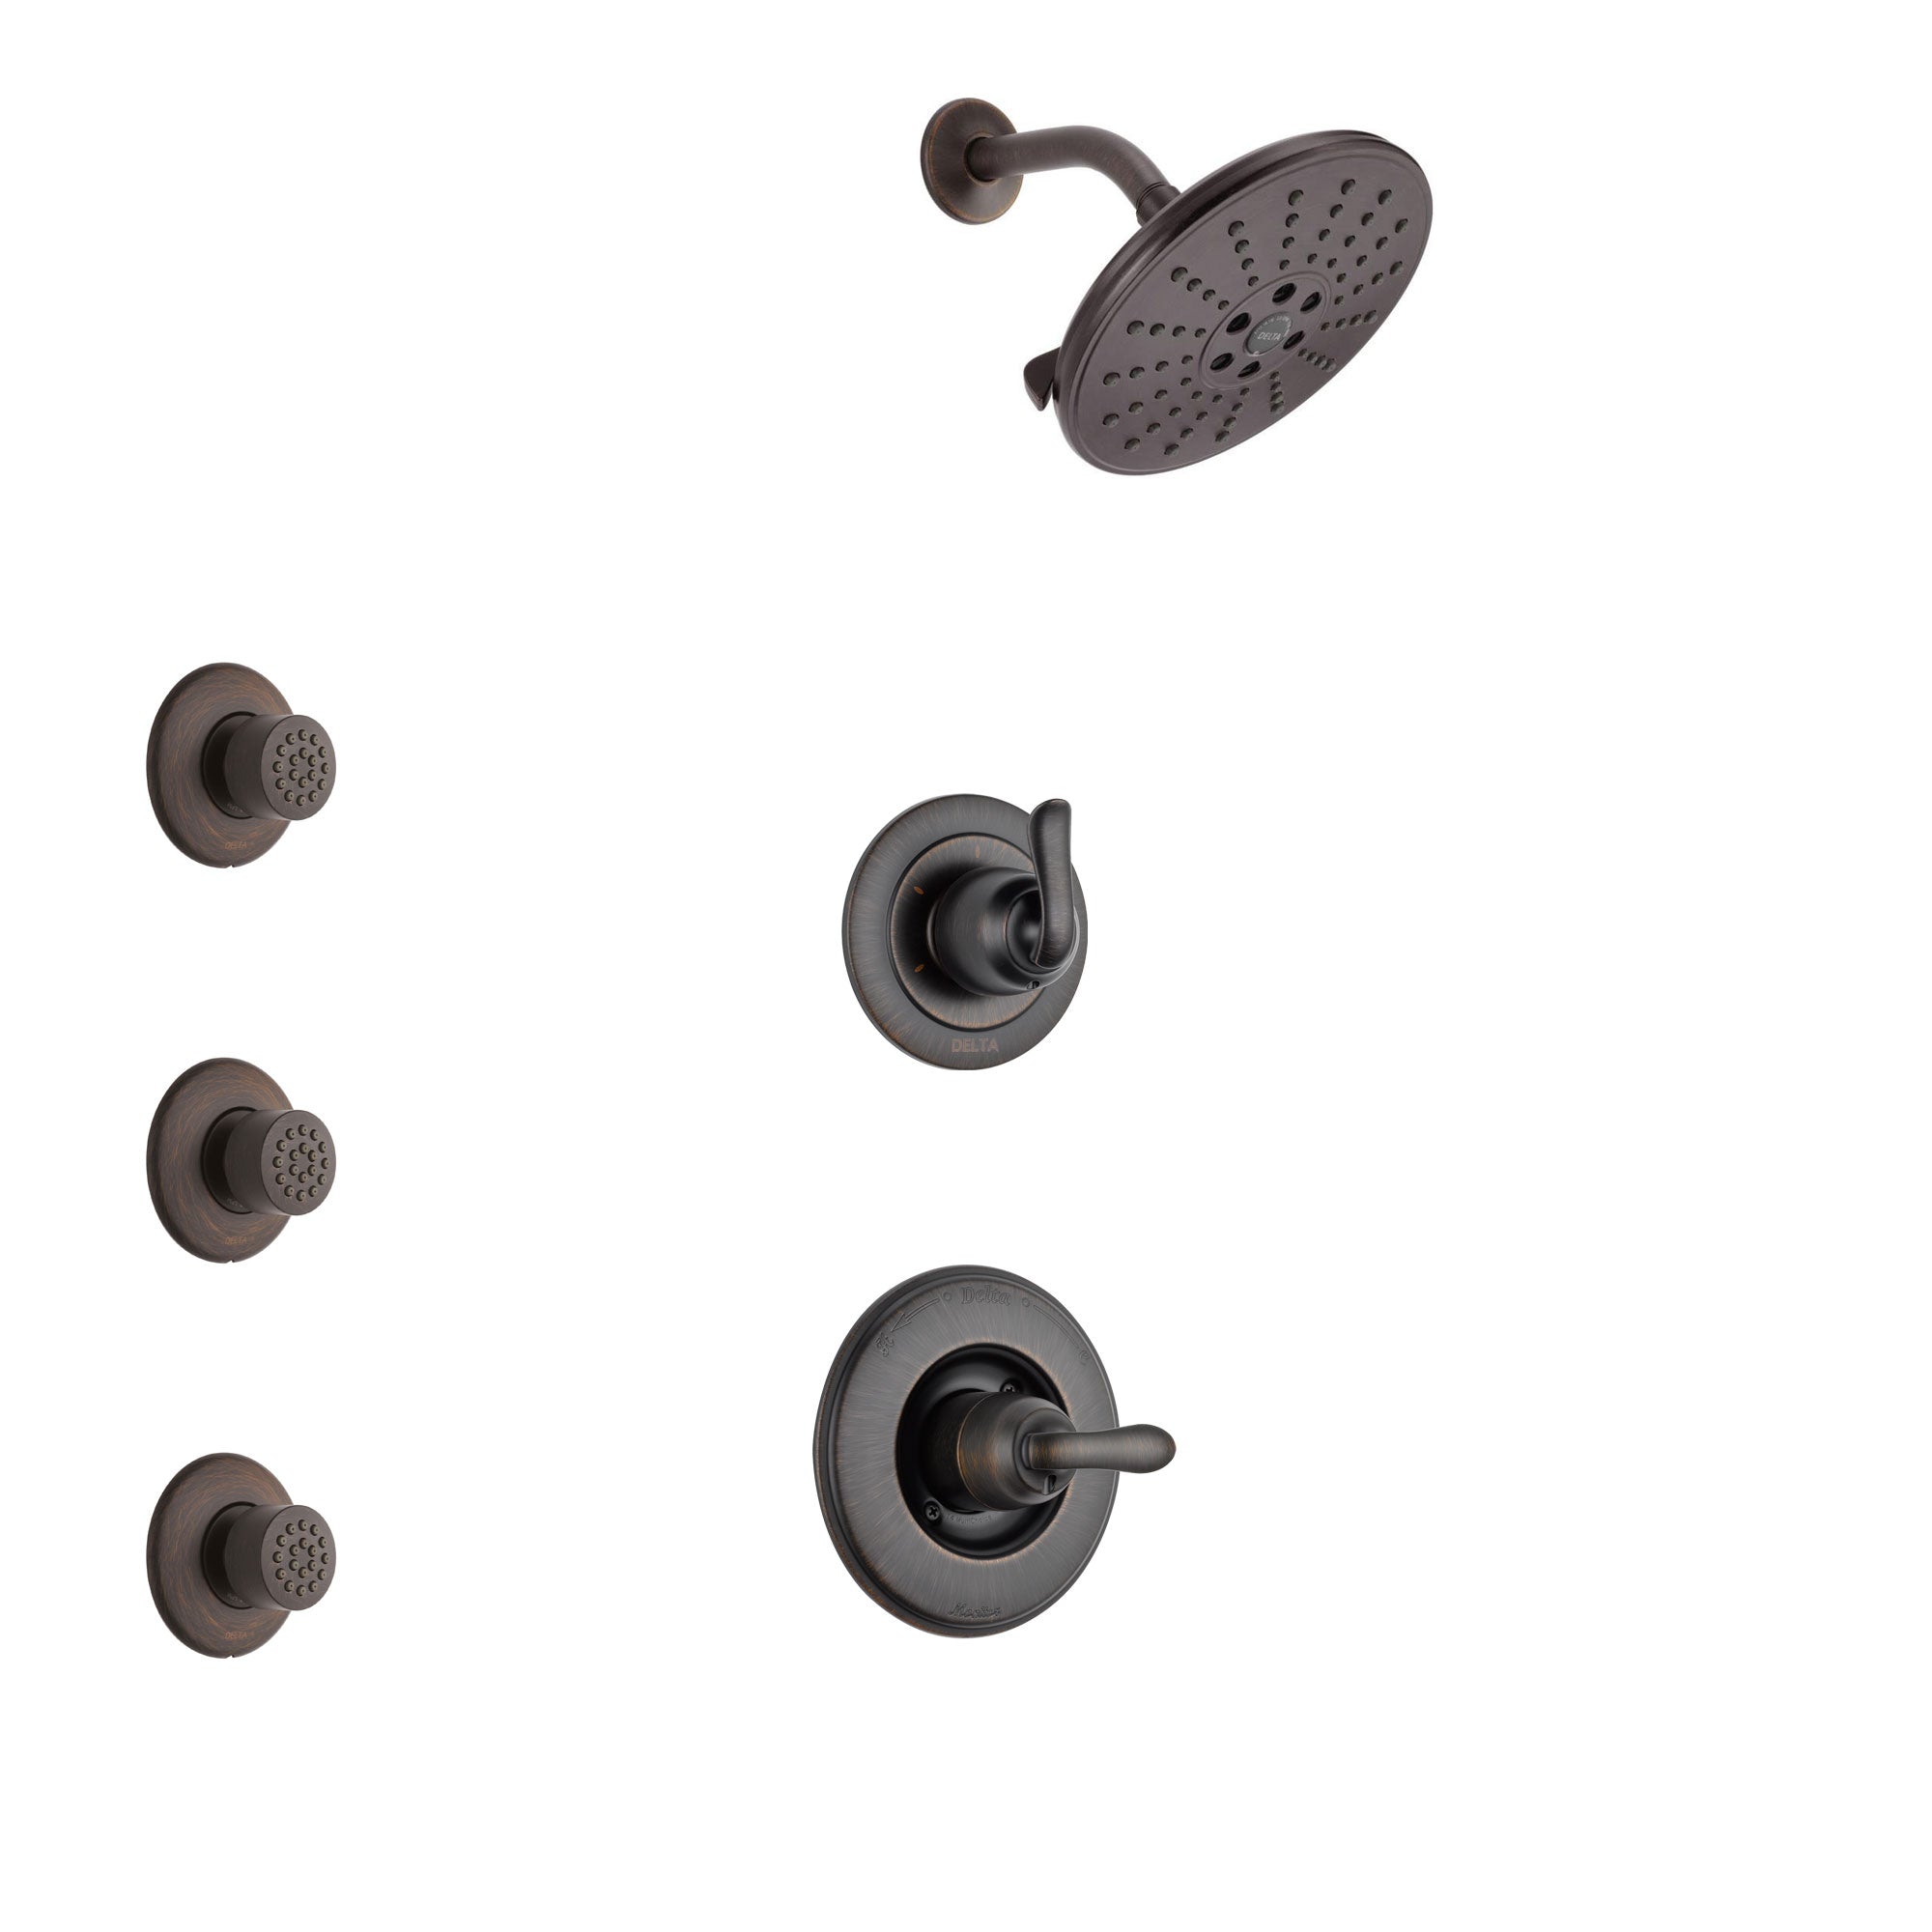 Delta Linden Venetian Bronze Finish Shower System with Control Handle, 3-Setting Diverter, Showerhead, and 3 Body Sprays SS1494RB1